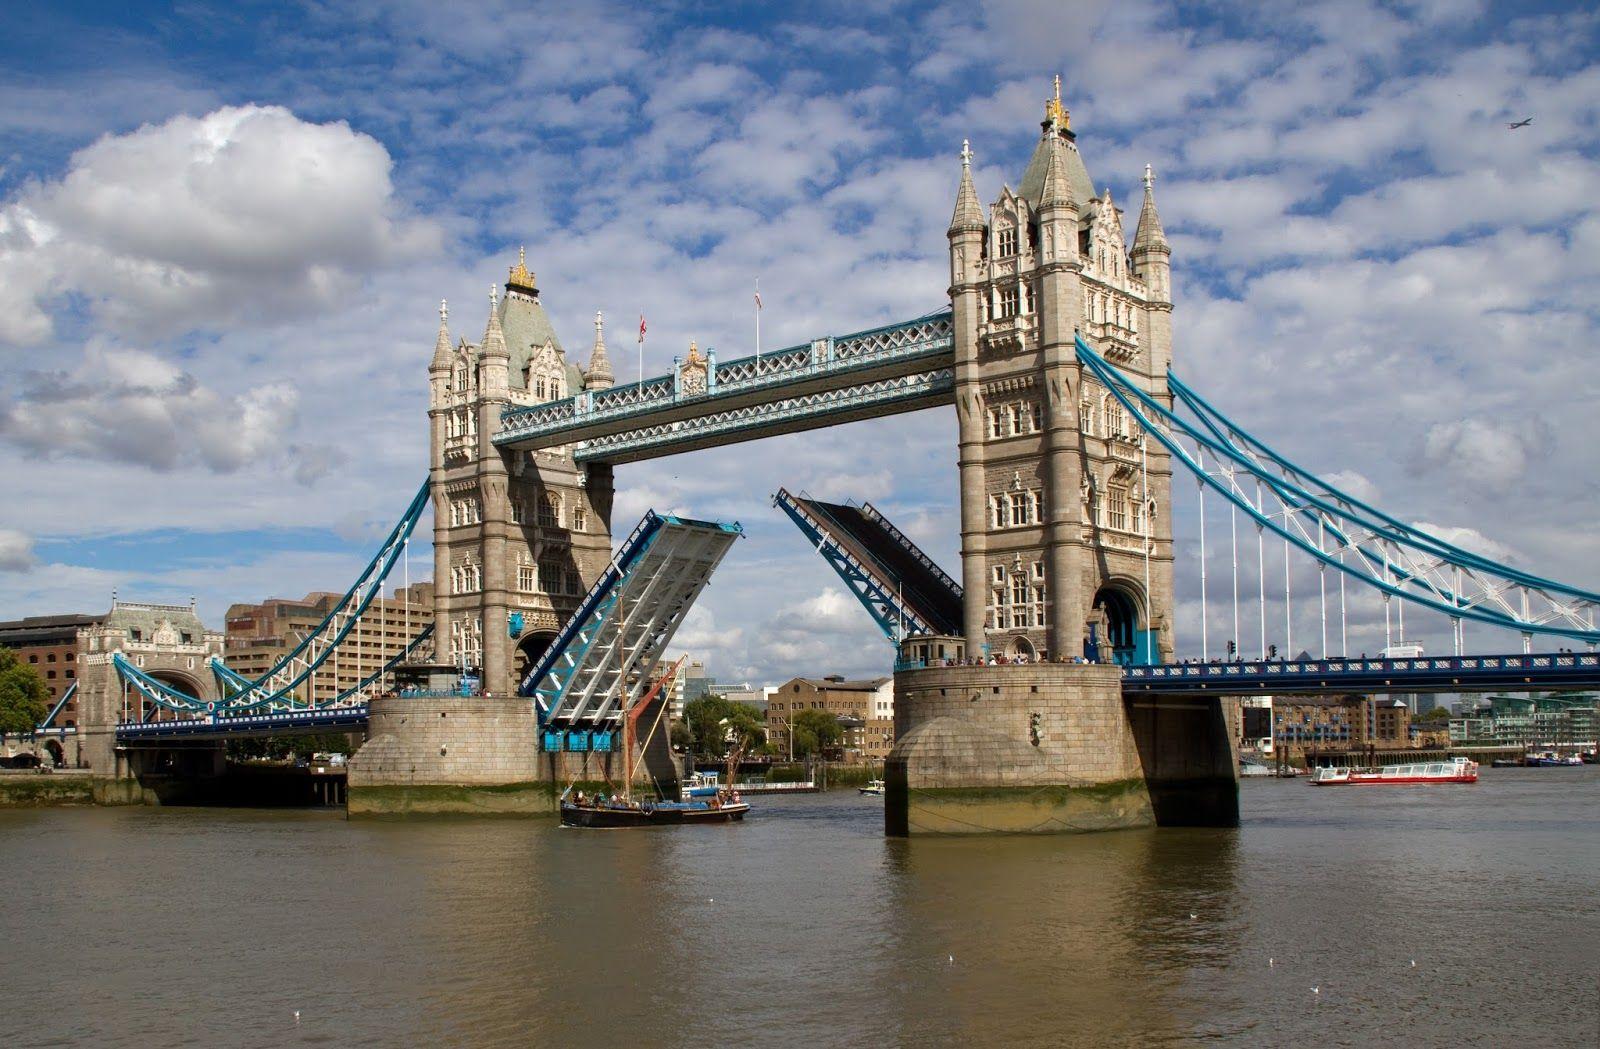 London Tower Bridge High Resolution Wallpapers For Free Download